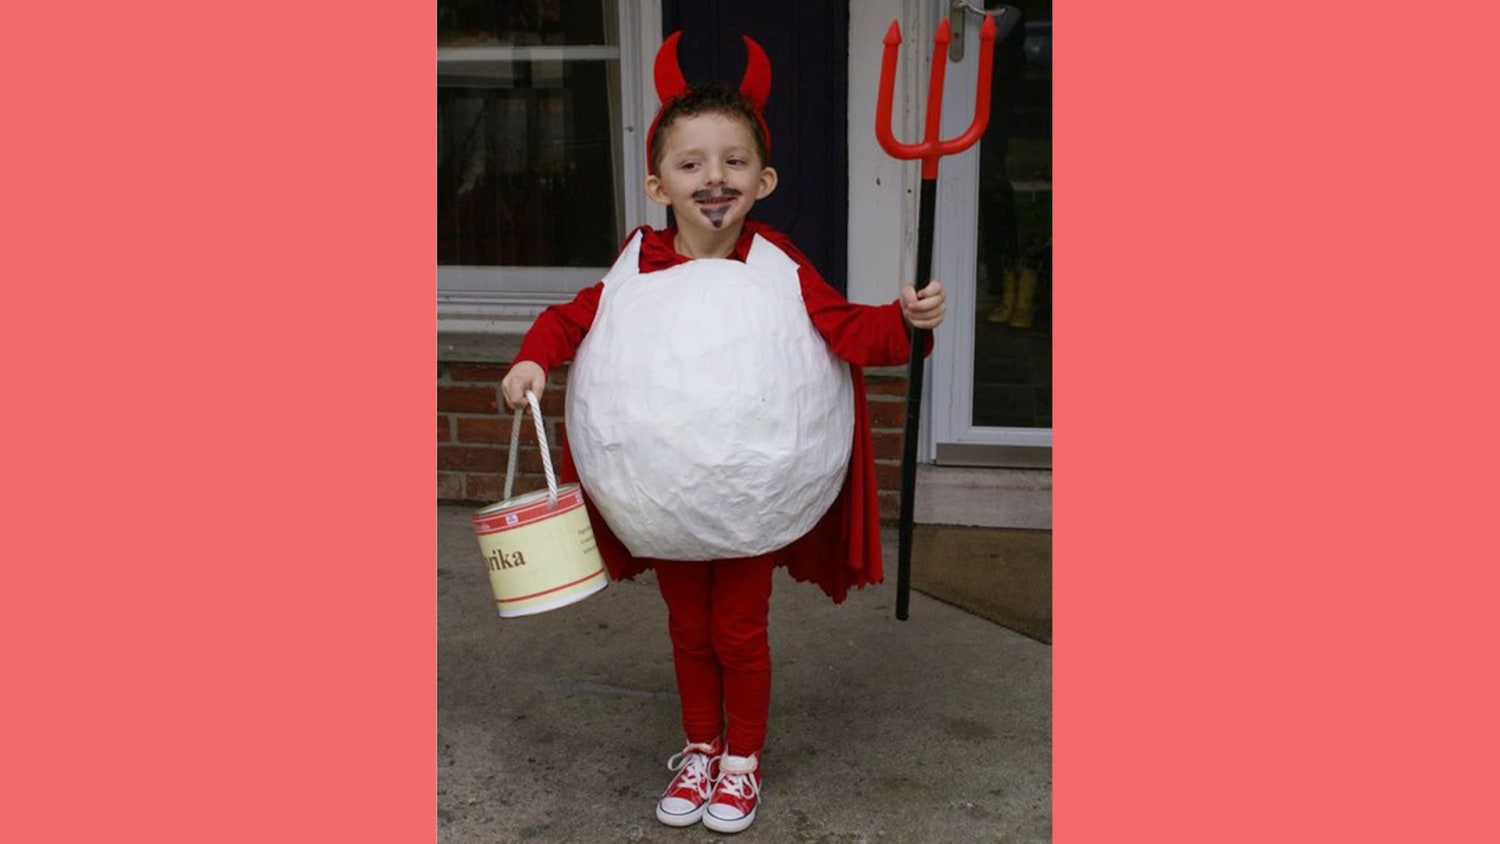 31 days of Halloween costumes: Deviled egg.